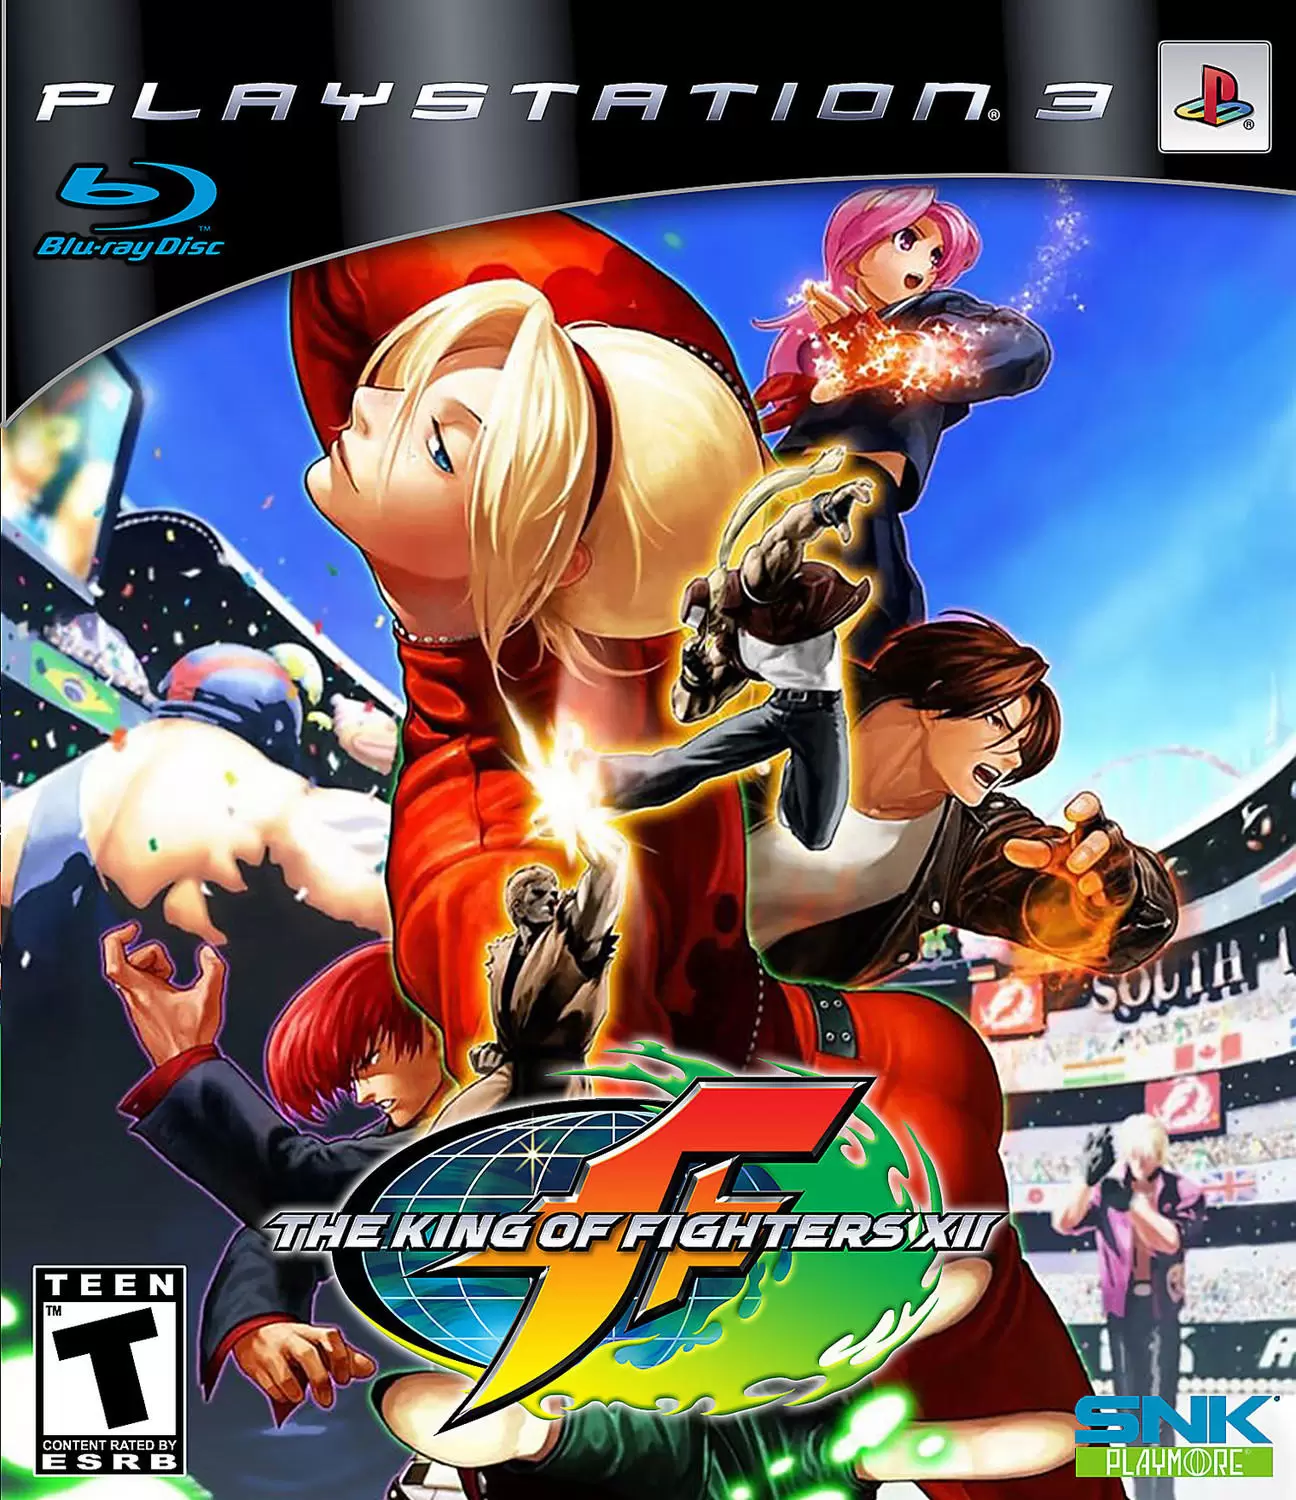 PS3 Games - The King of Fighters XII